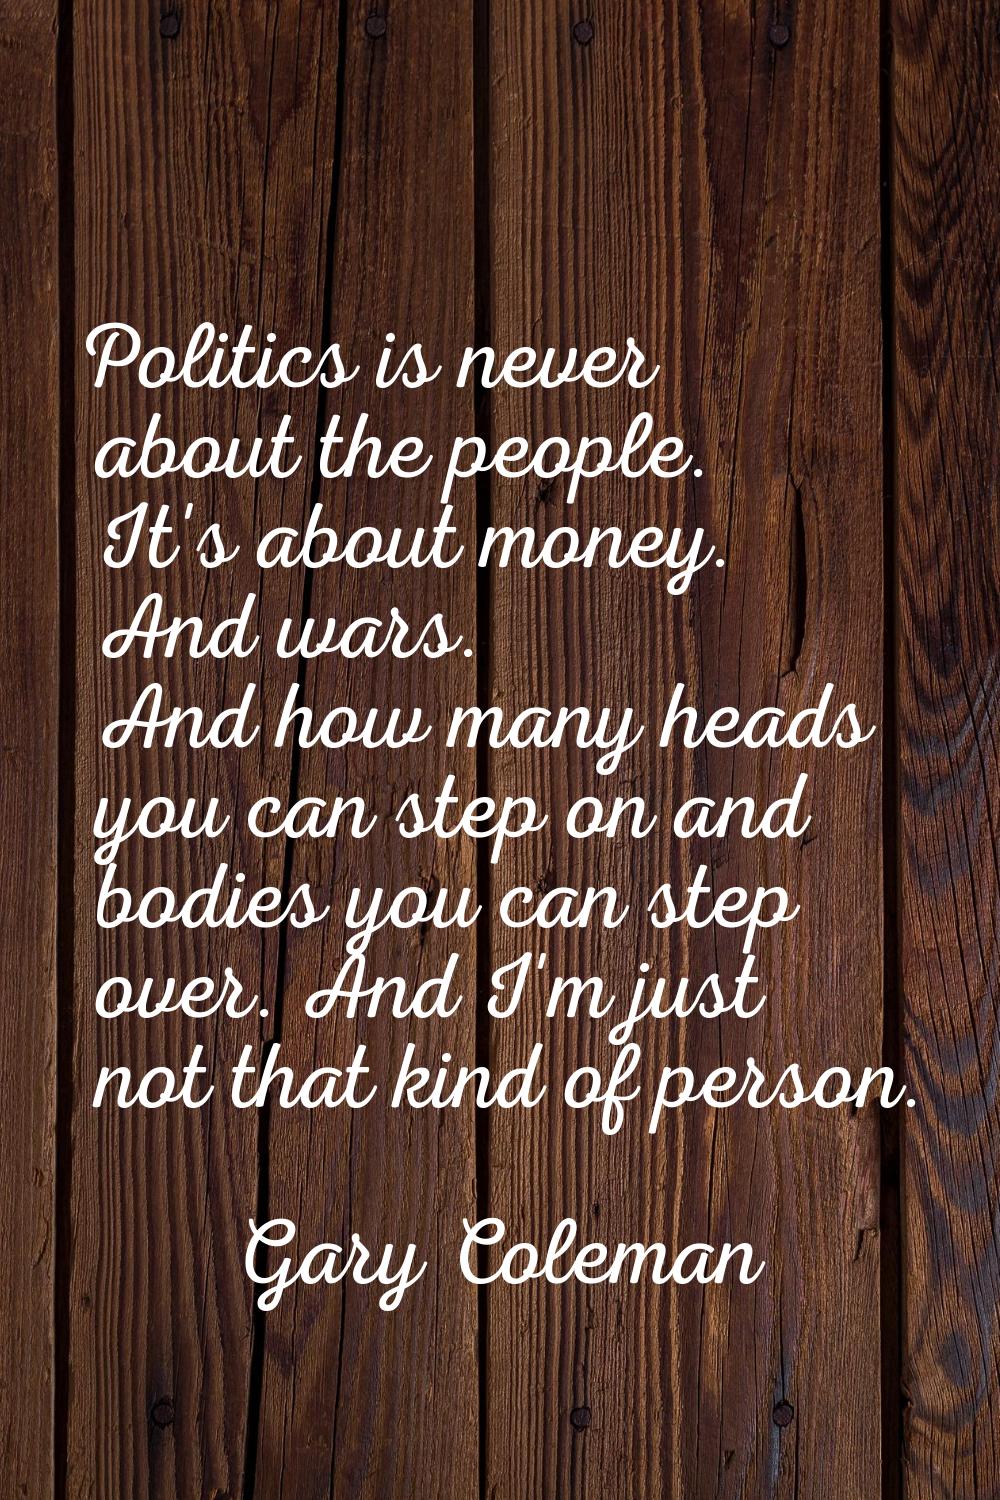 Politics is never about the people. It's about money. And wars. And how many heads you can step on 